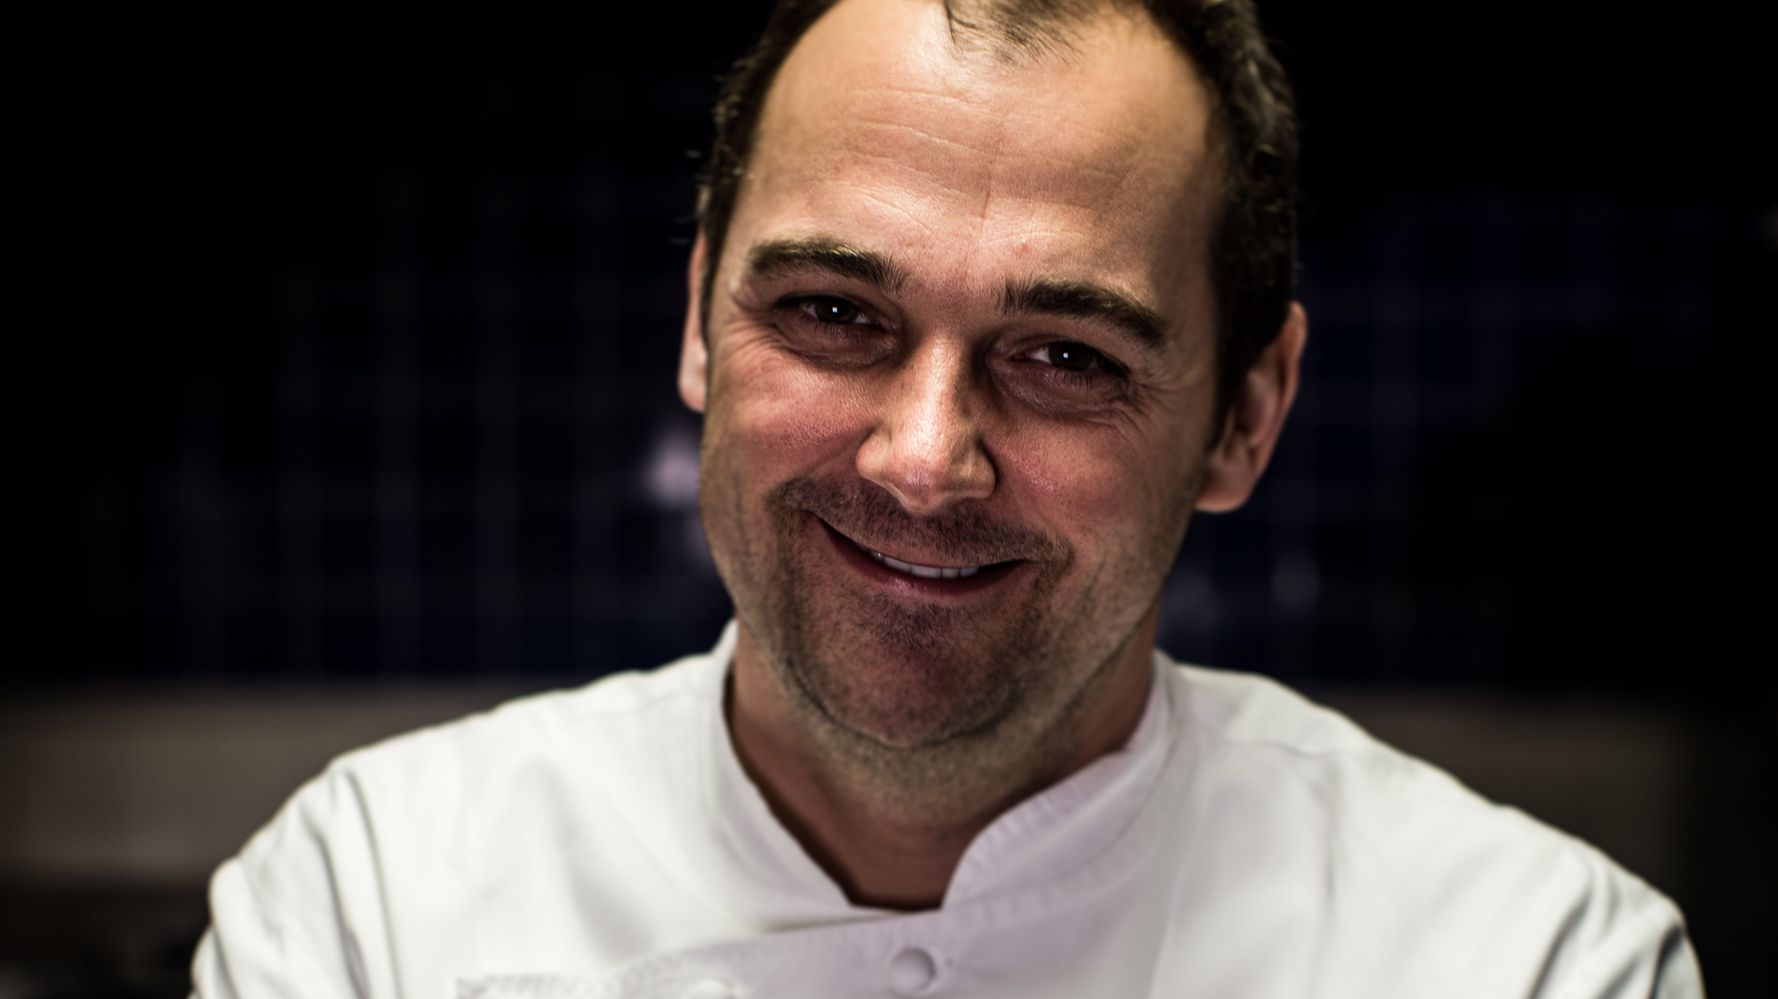 Chef Daniel Humm On The Secret To Finding Success In New York, Where So